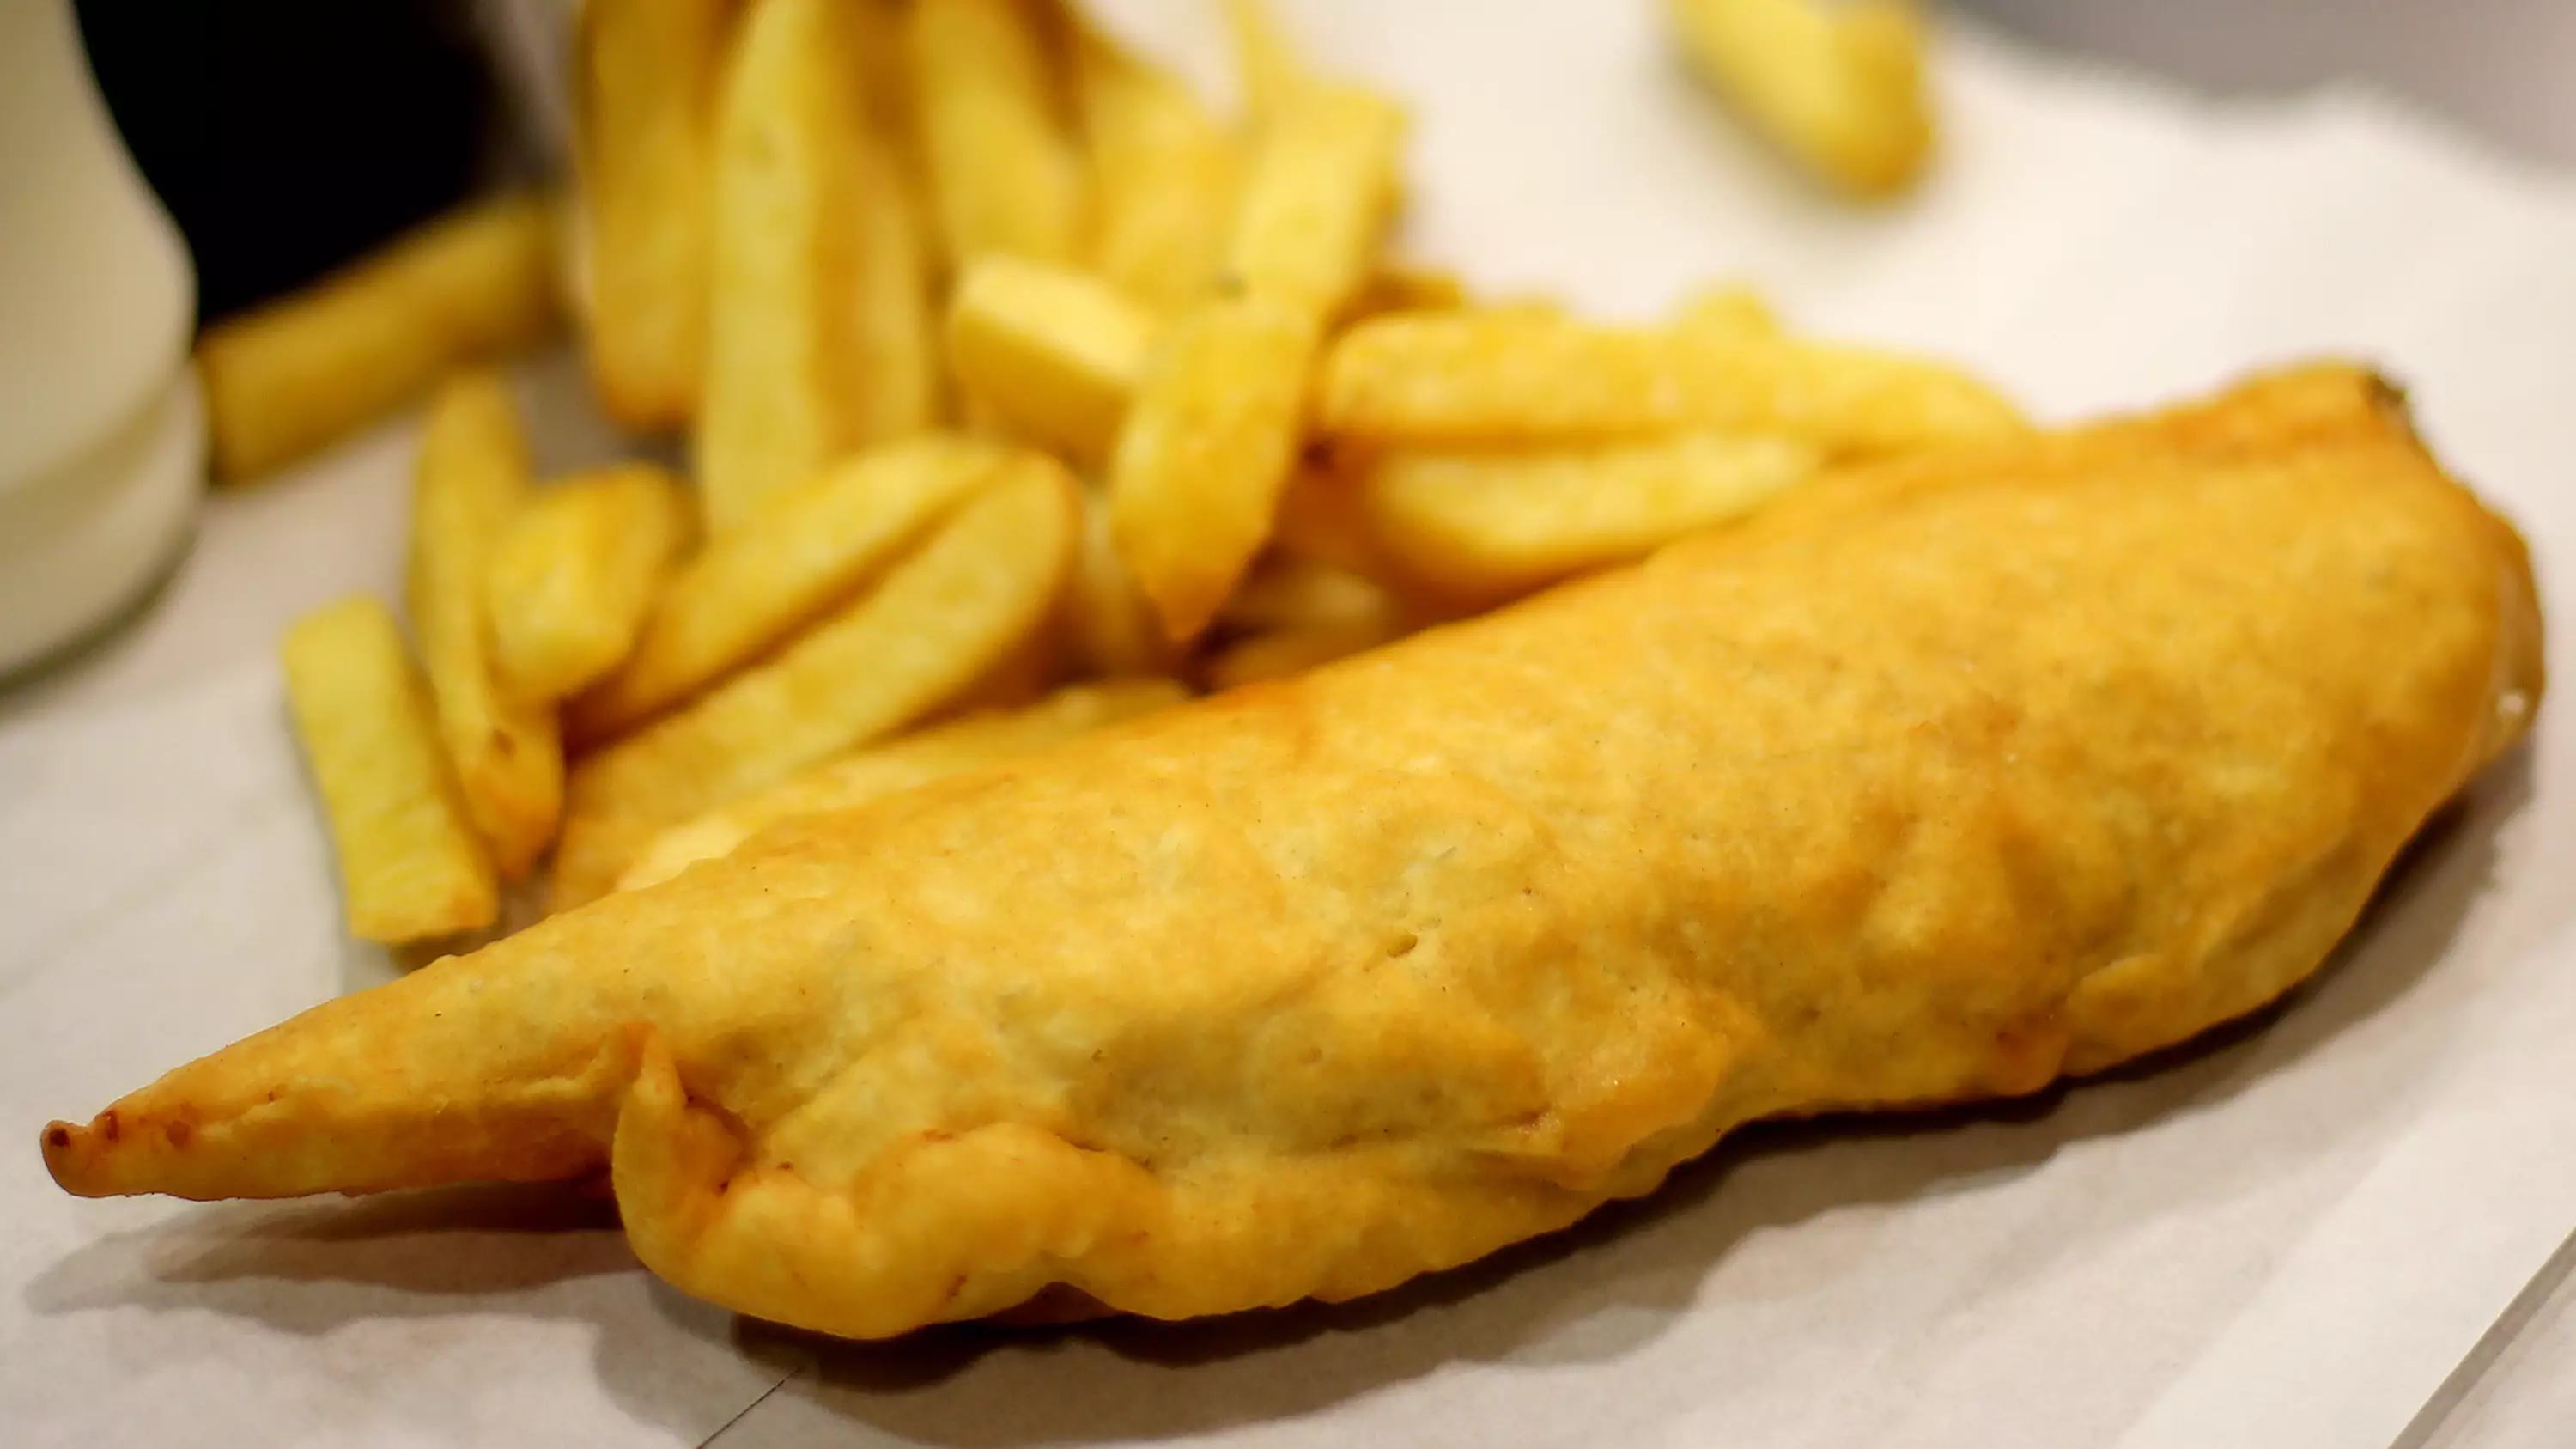 Police Say Smoking Weed And Meeting Mates For Fish And Chips Not 'Essential Travel' Or 'Daily Exercise'